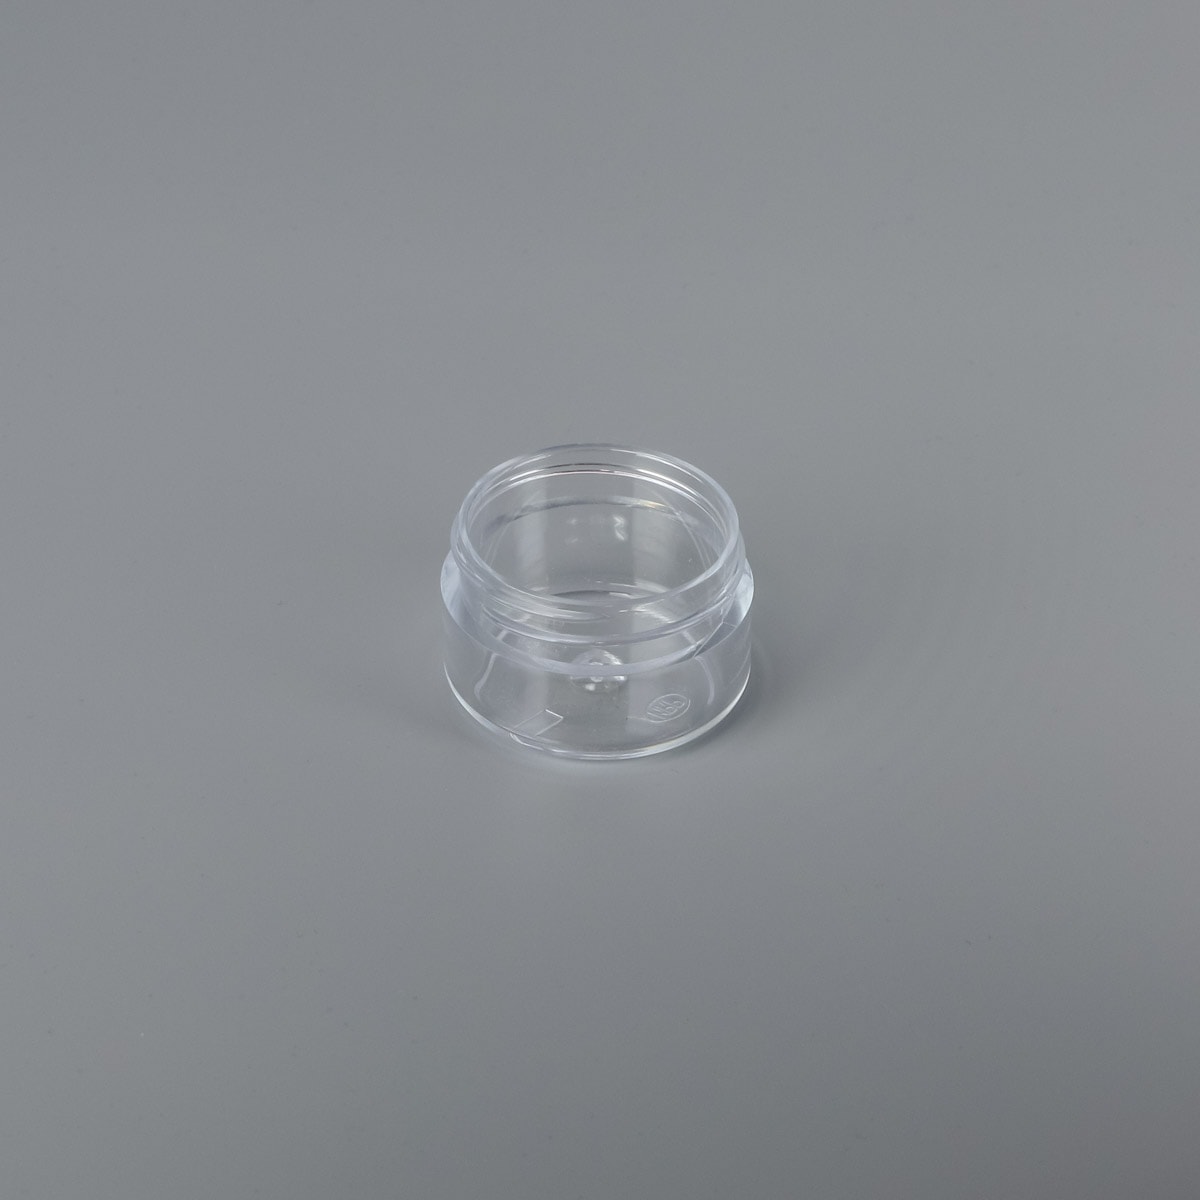 43mm Thick Wall Rounded Jar 008043TR - 0.5 Ounce Capacity